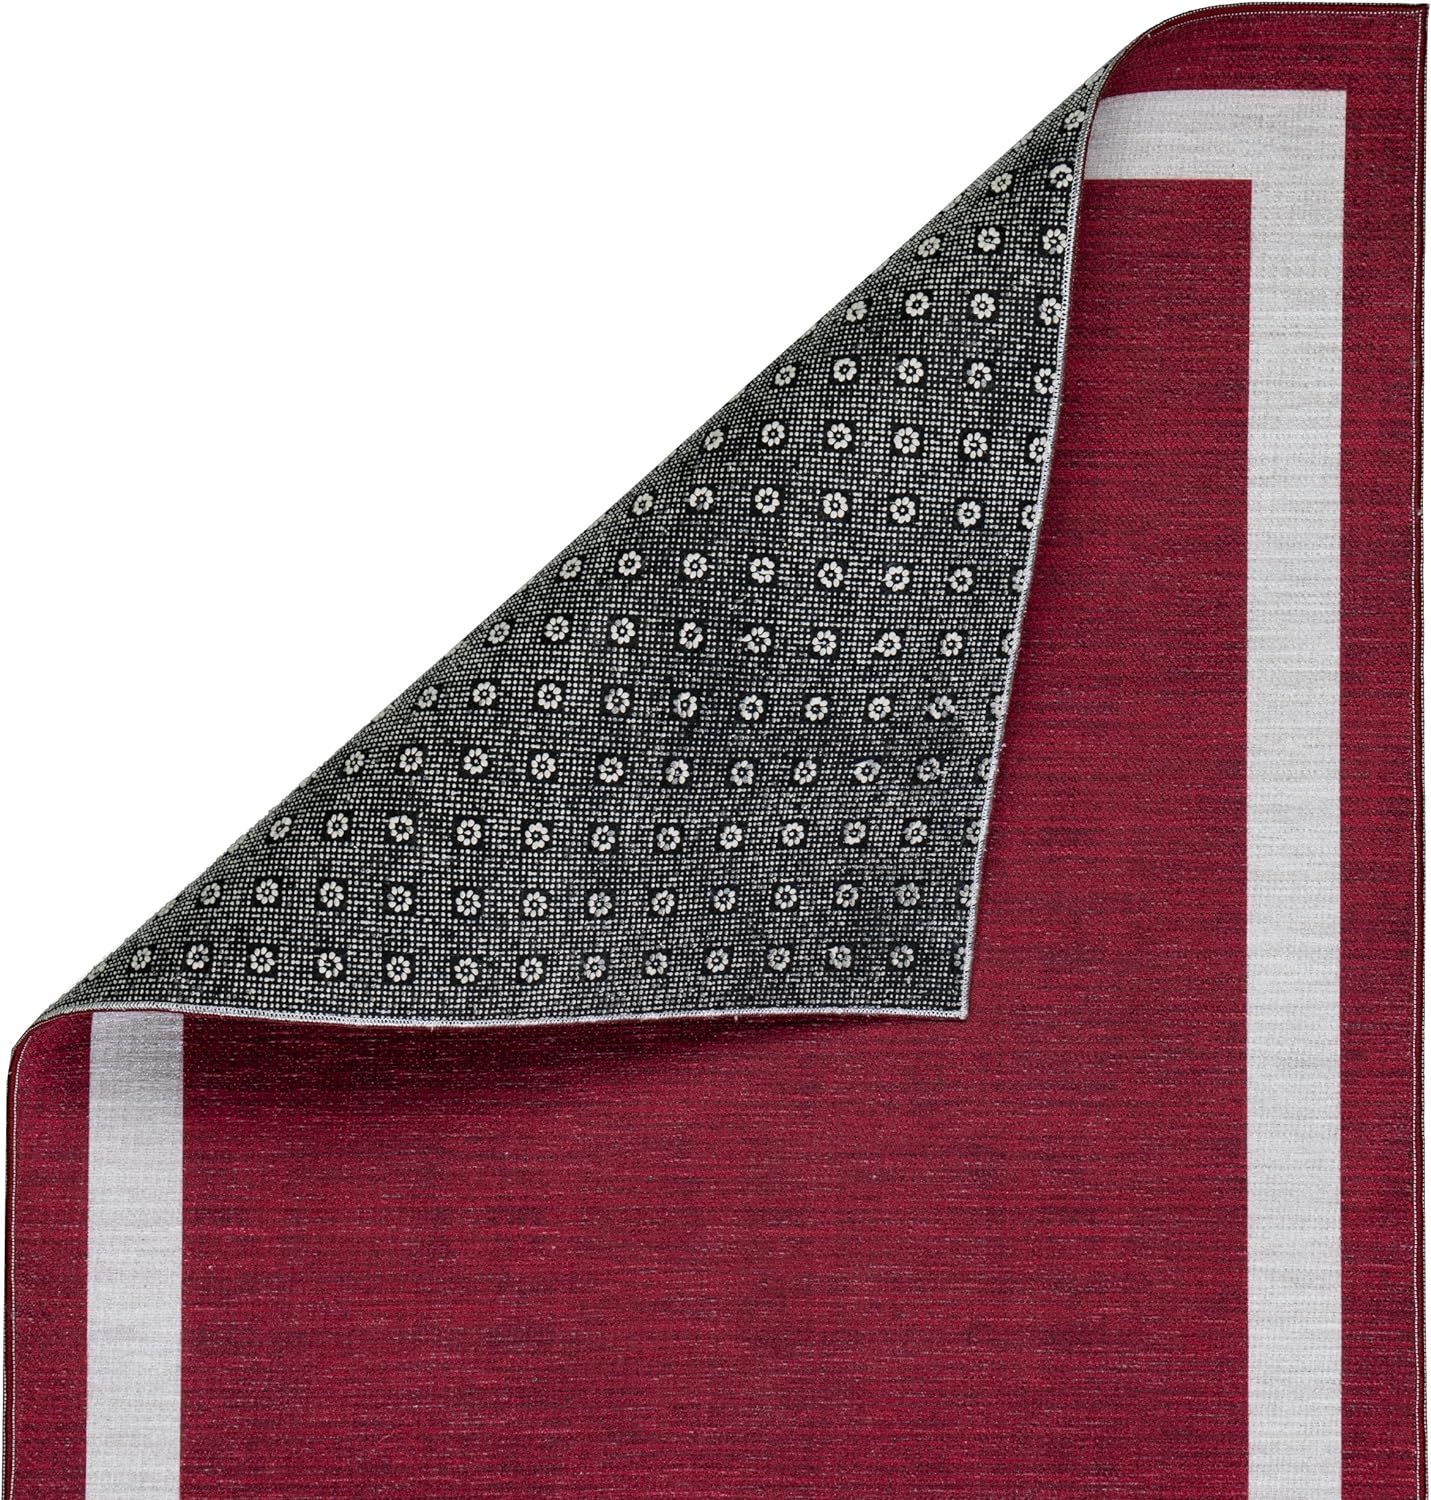 Playa Rug Machine Washable Area Rug With Non Slip Backing - Stain Resistant - Eco Friendly - Family and Pet Friendly - Everest Geometric Modern Bordered Burgundy&Creme Design